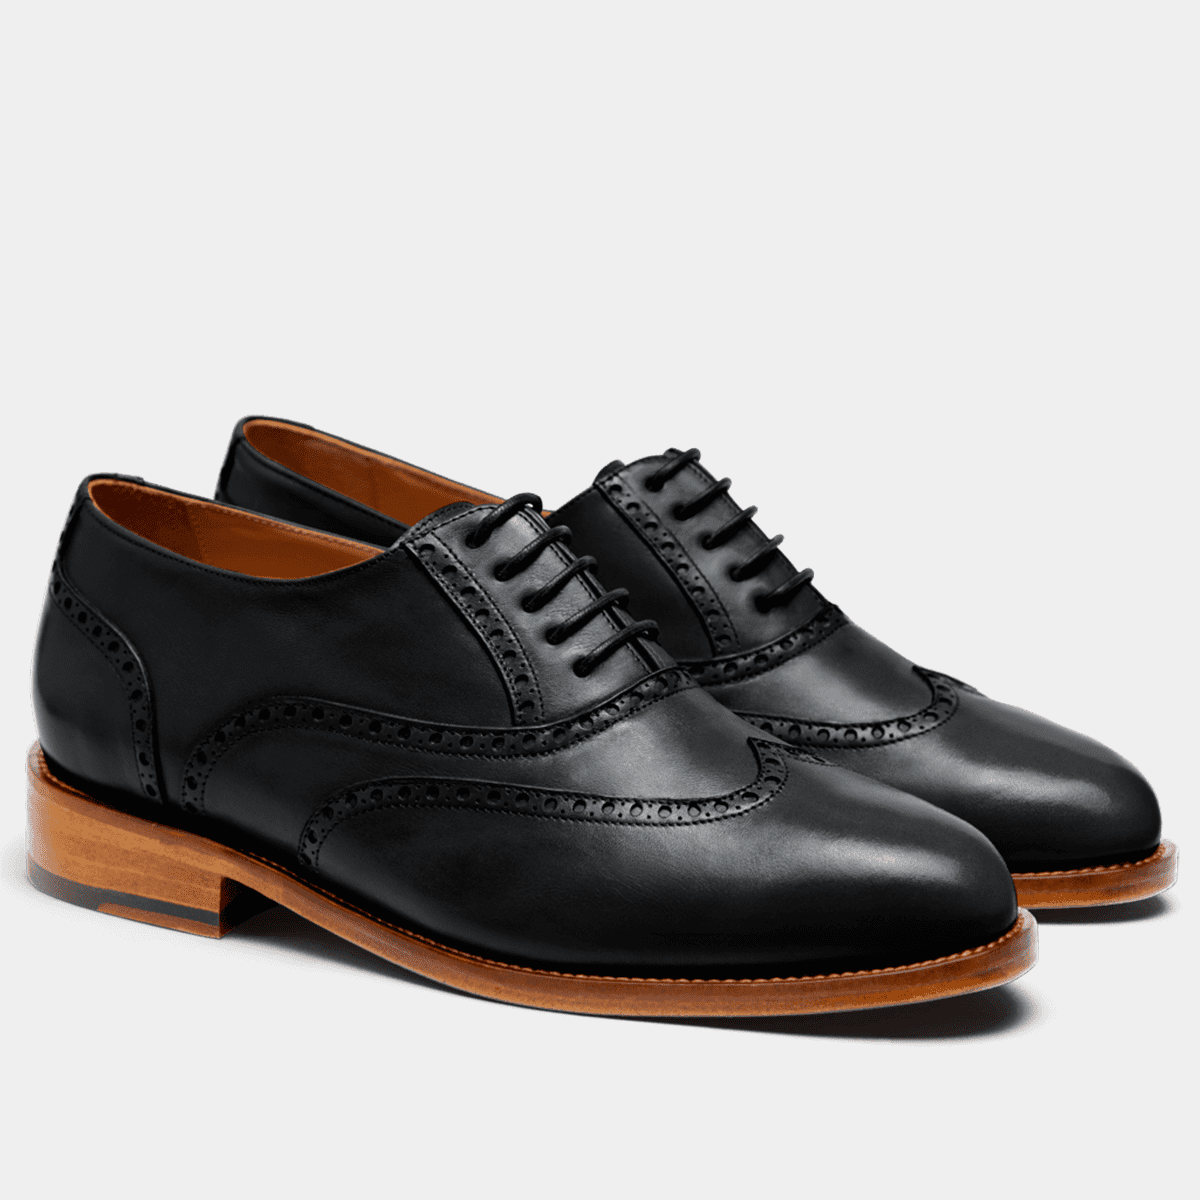 Creative Styling with Oxford Shoes